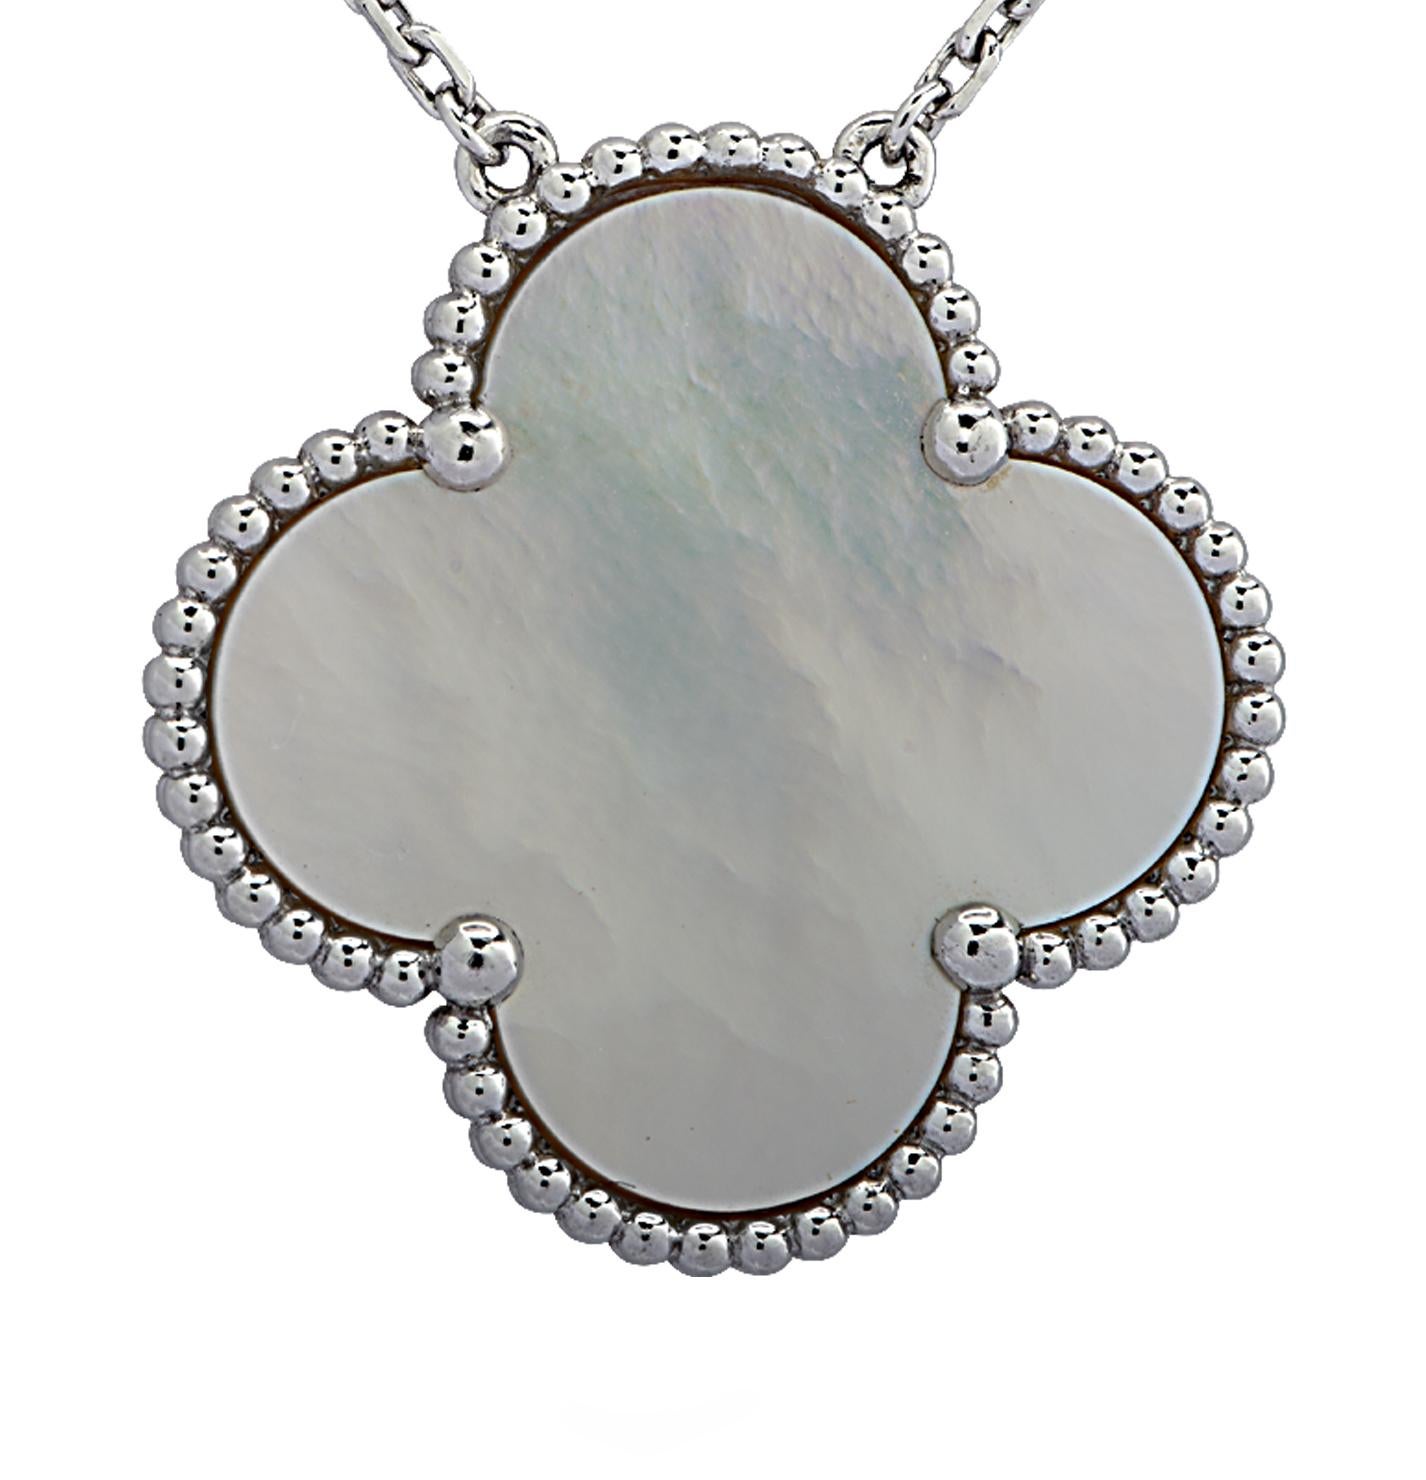 Modern Van Cleef & Arpels Magic Alhambra Mother of Pearl White Gold Pendant Necklace